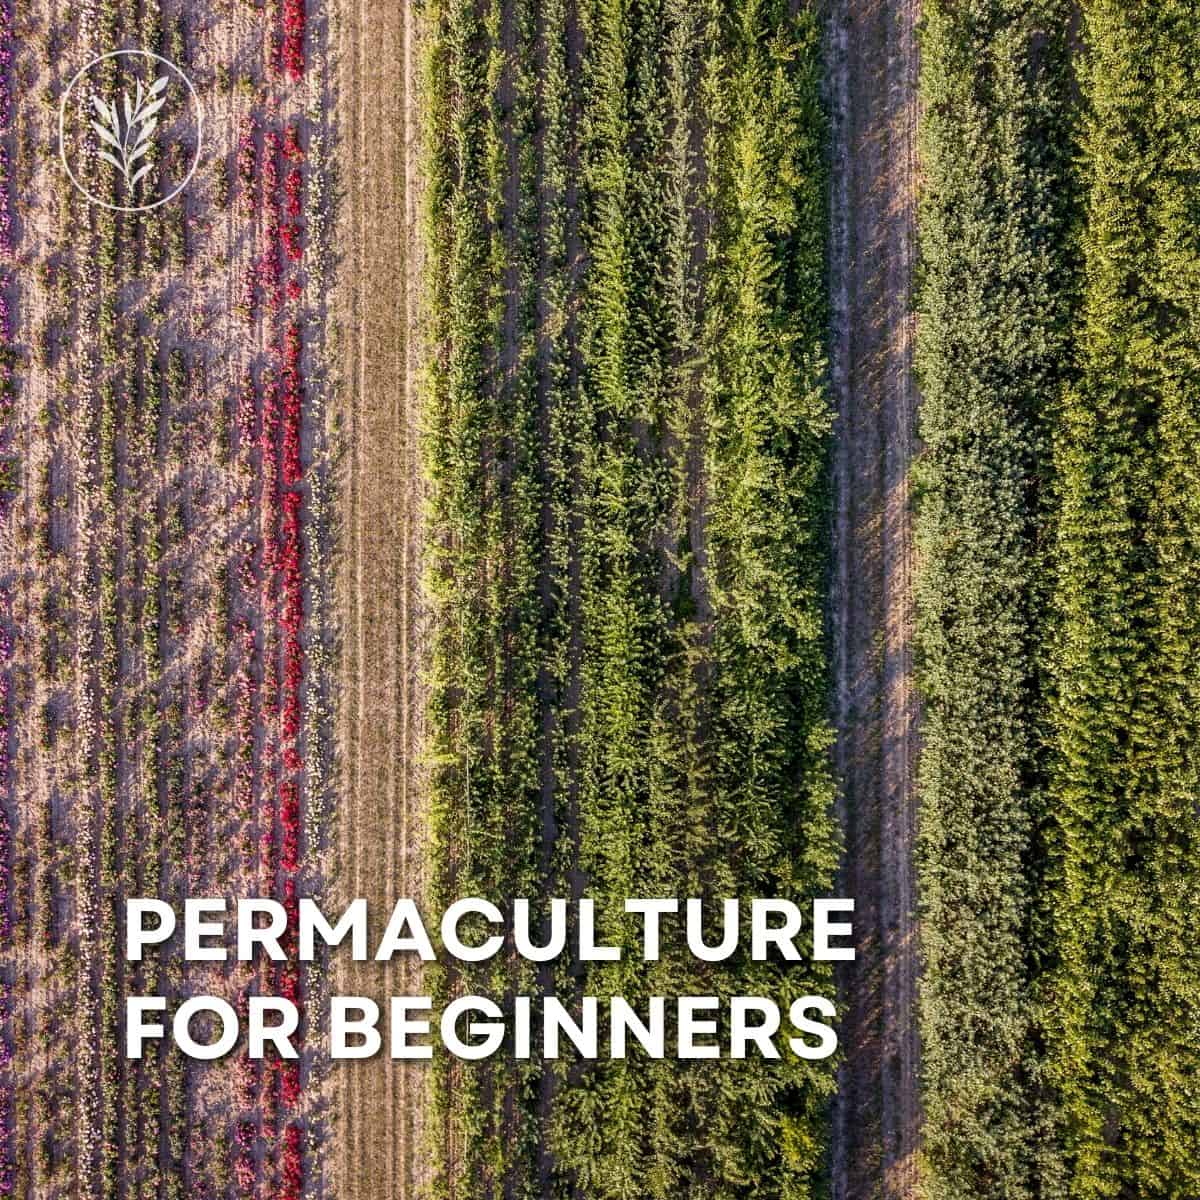 Permaculture for beginners via @home4theharvest